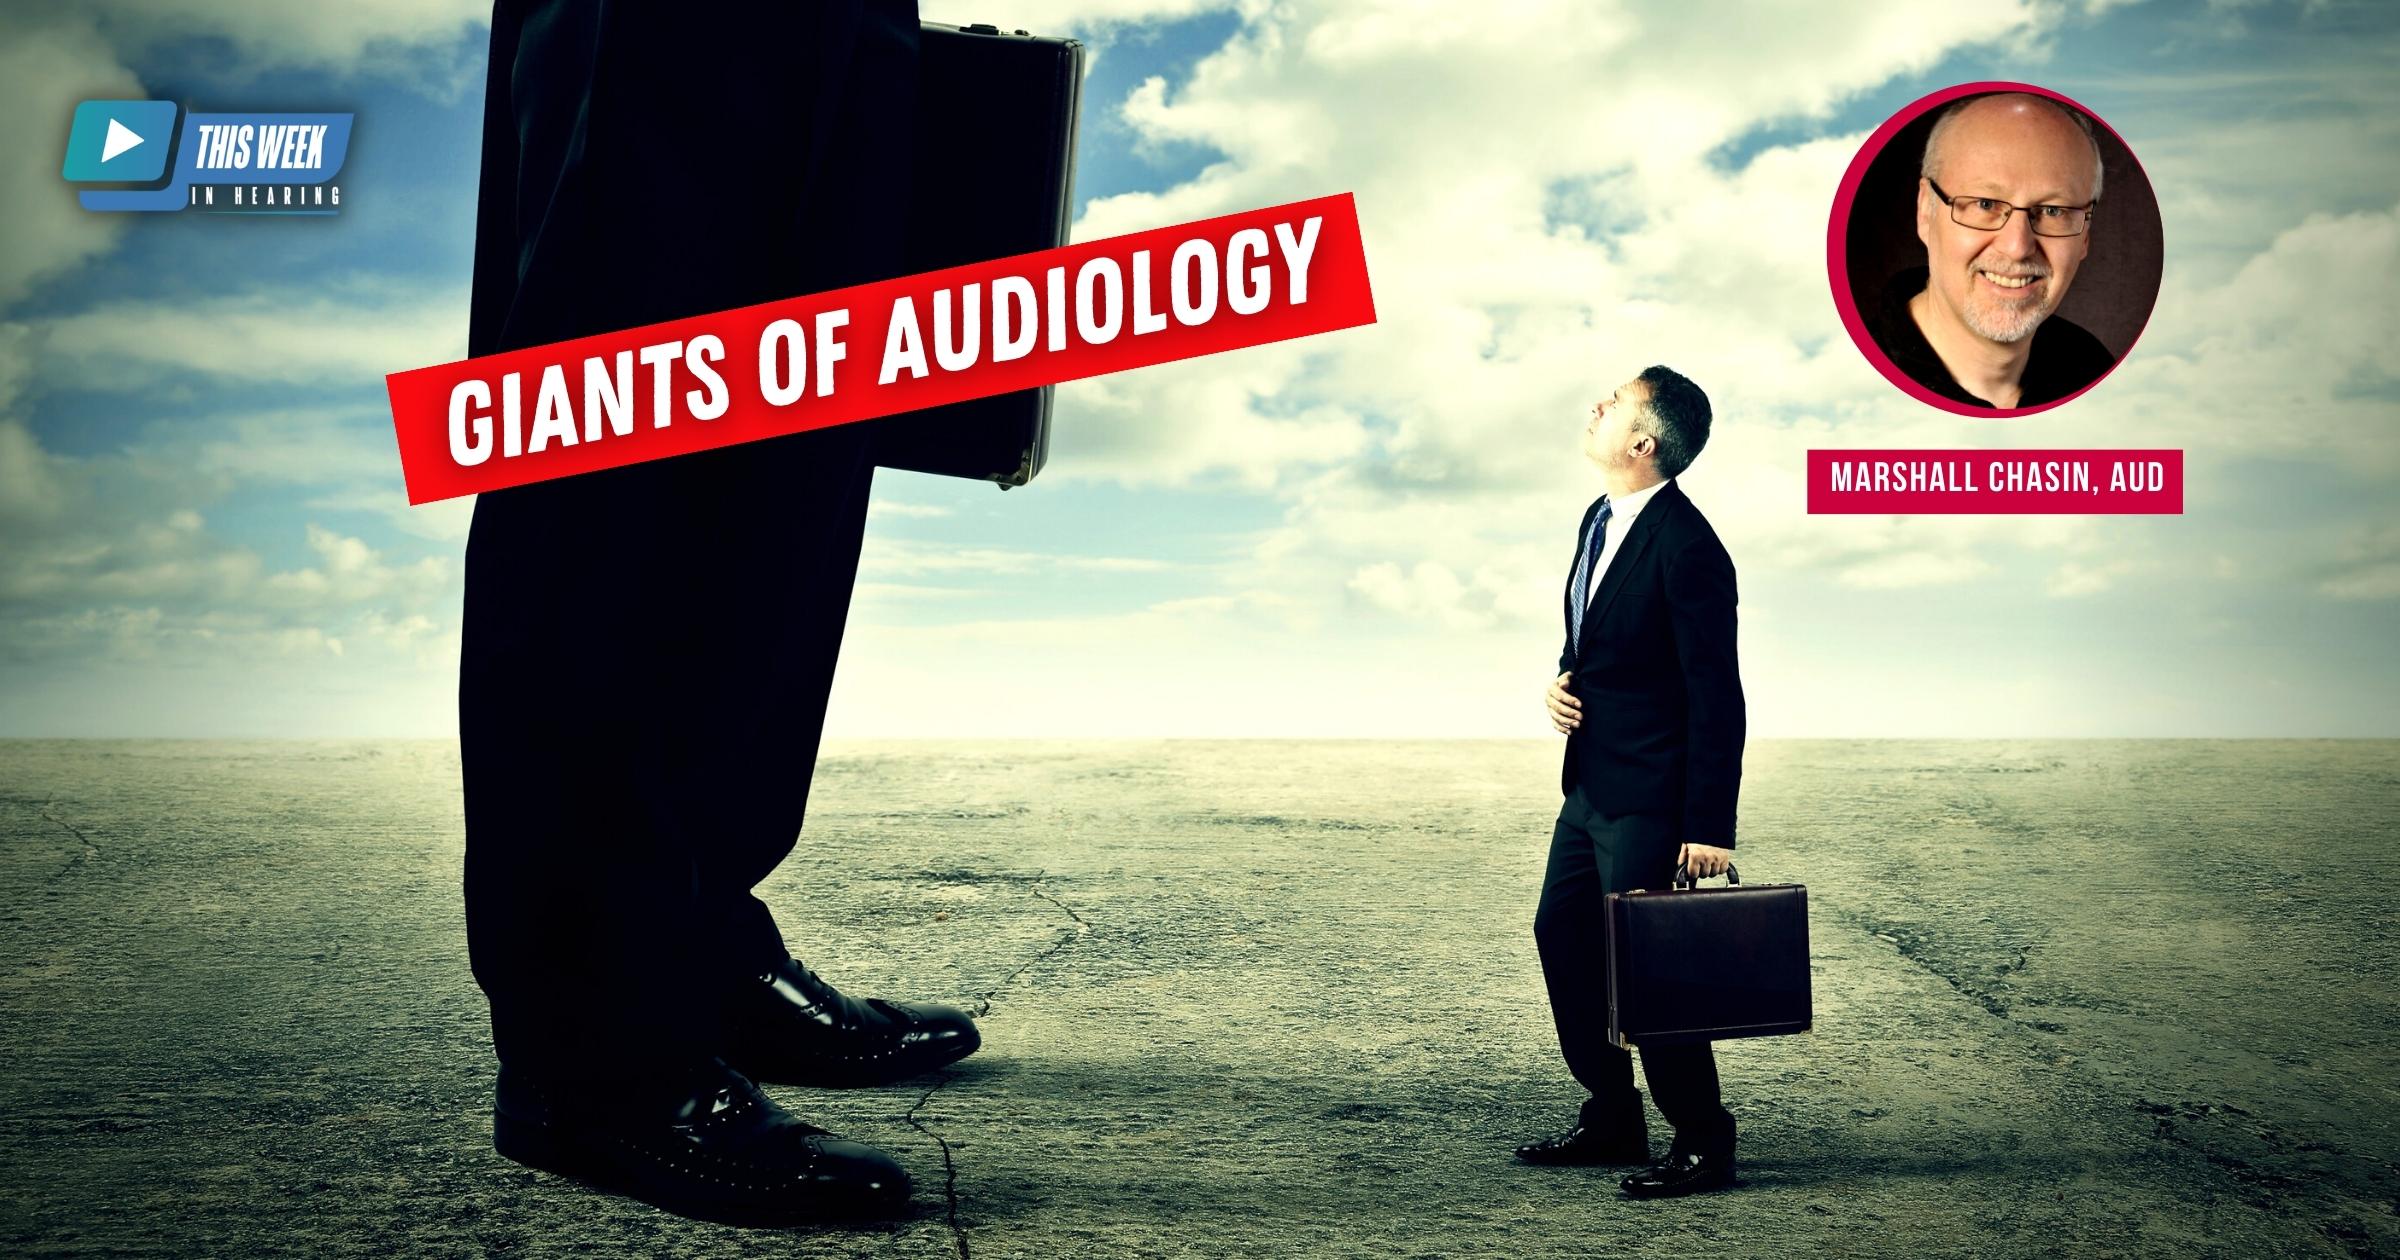 Featured image for “The Giants of Audiology: Interview with Marshall Chasin, AuD”